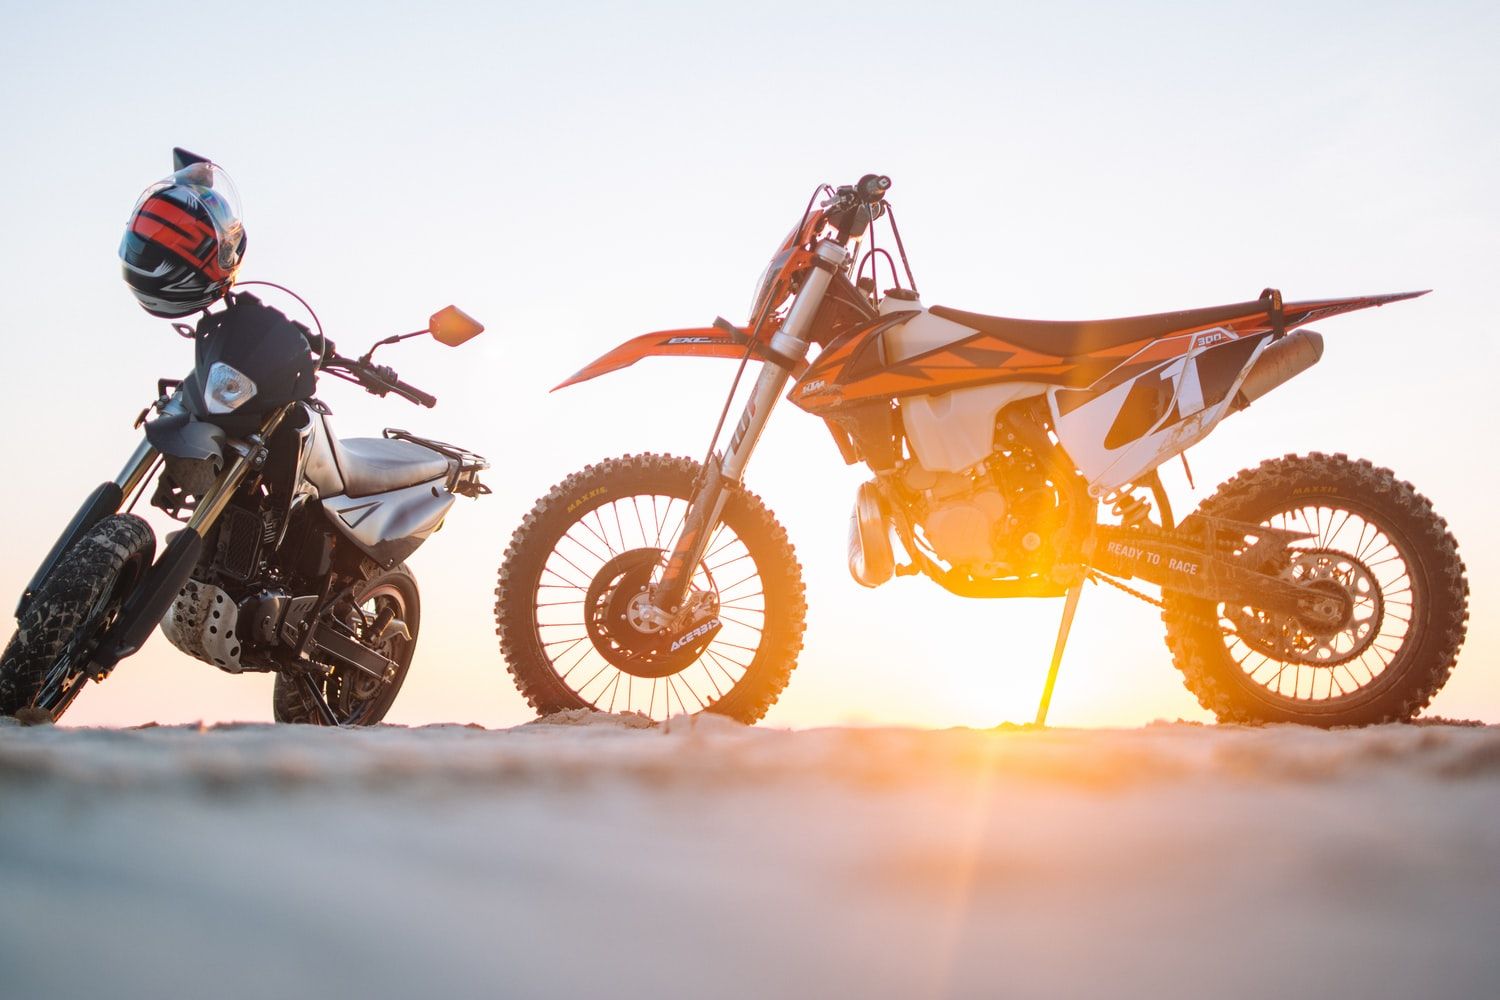 How Much Does Dirt Bike Insurance Cost?